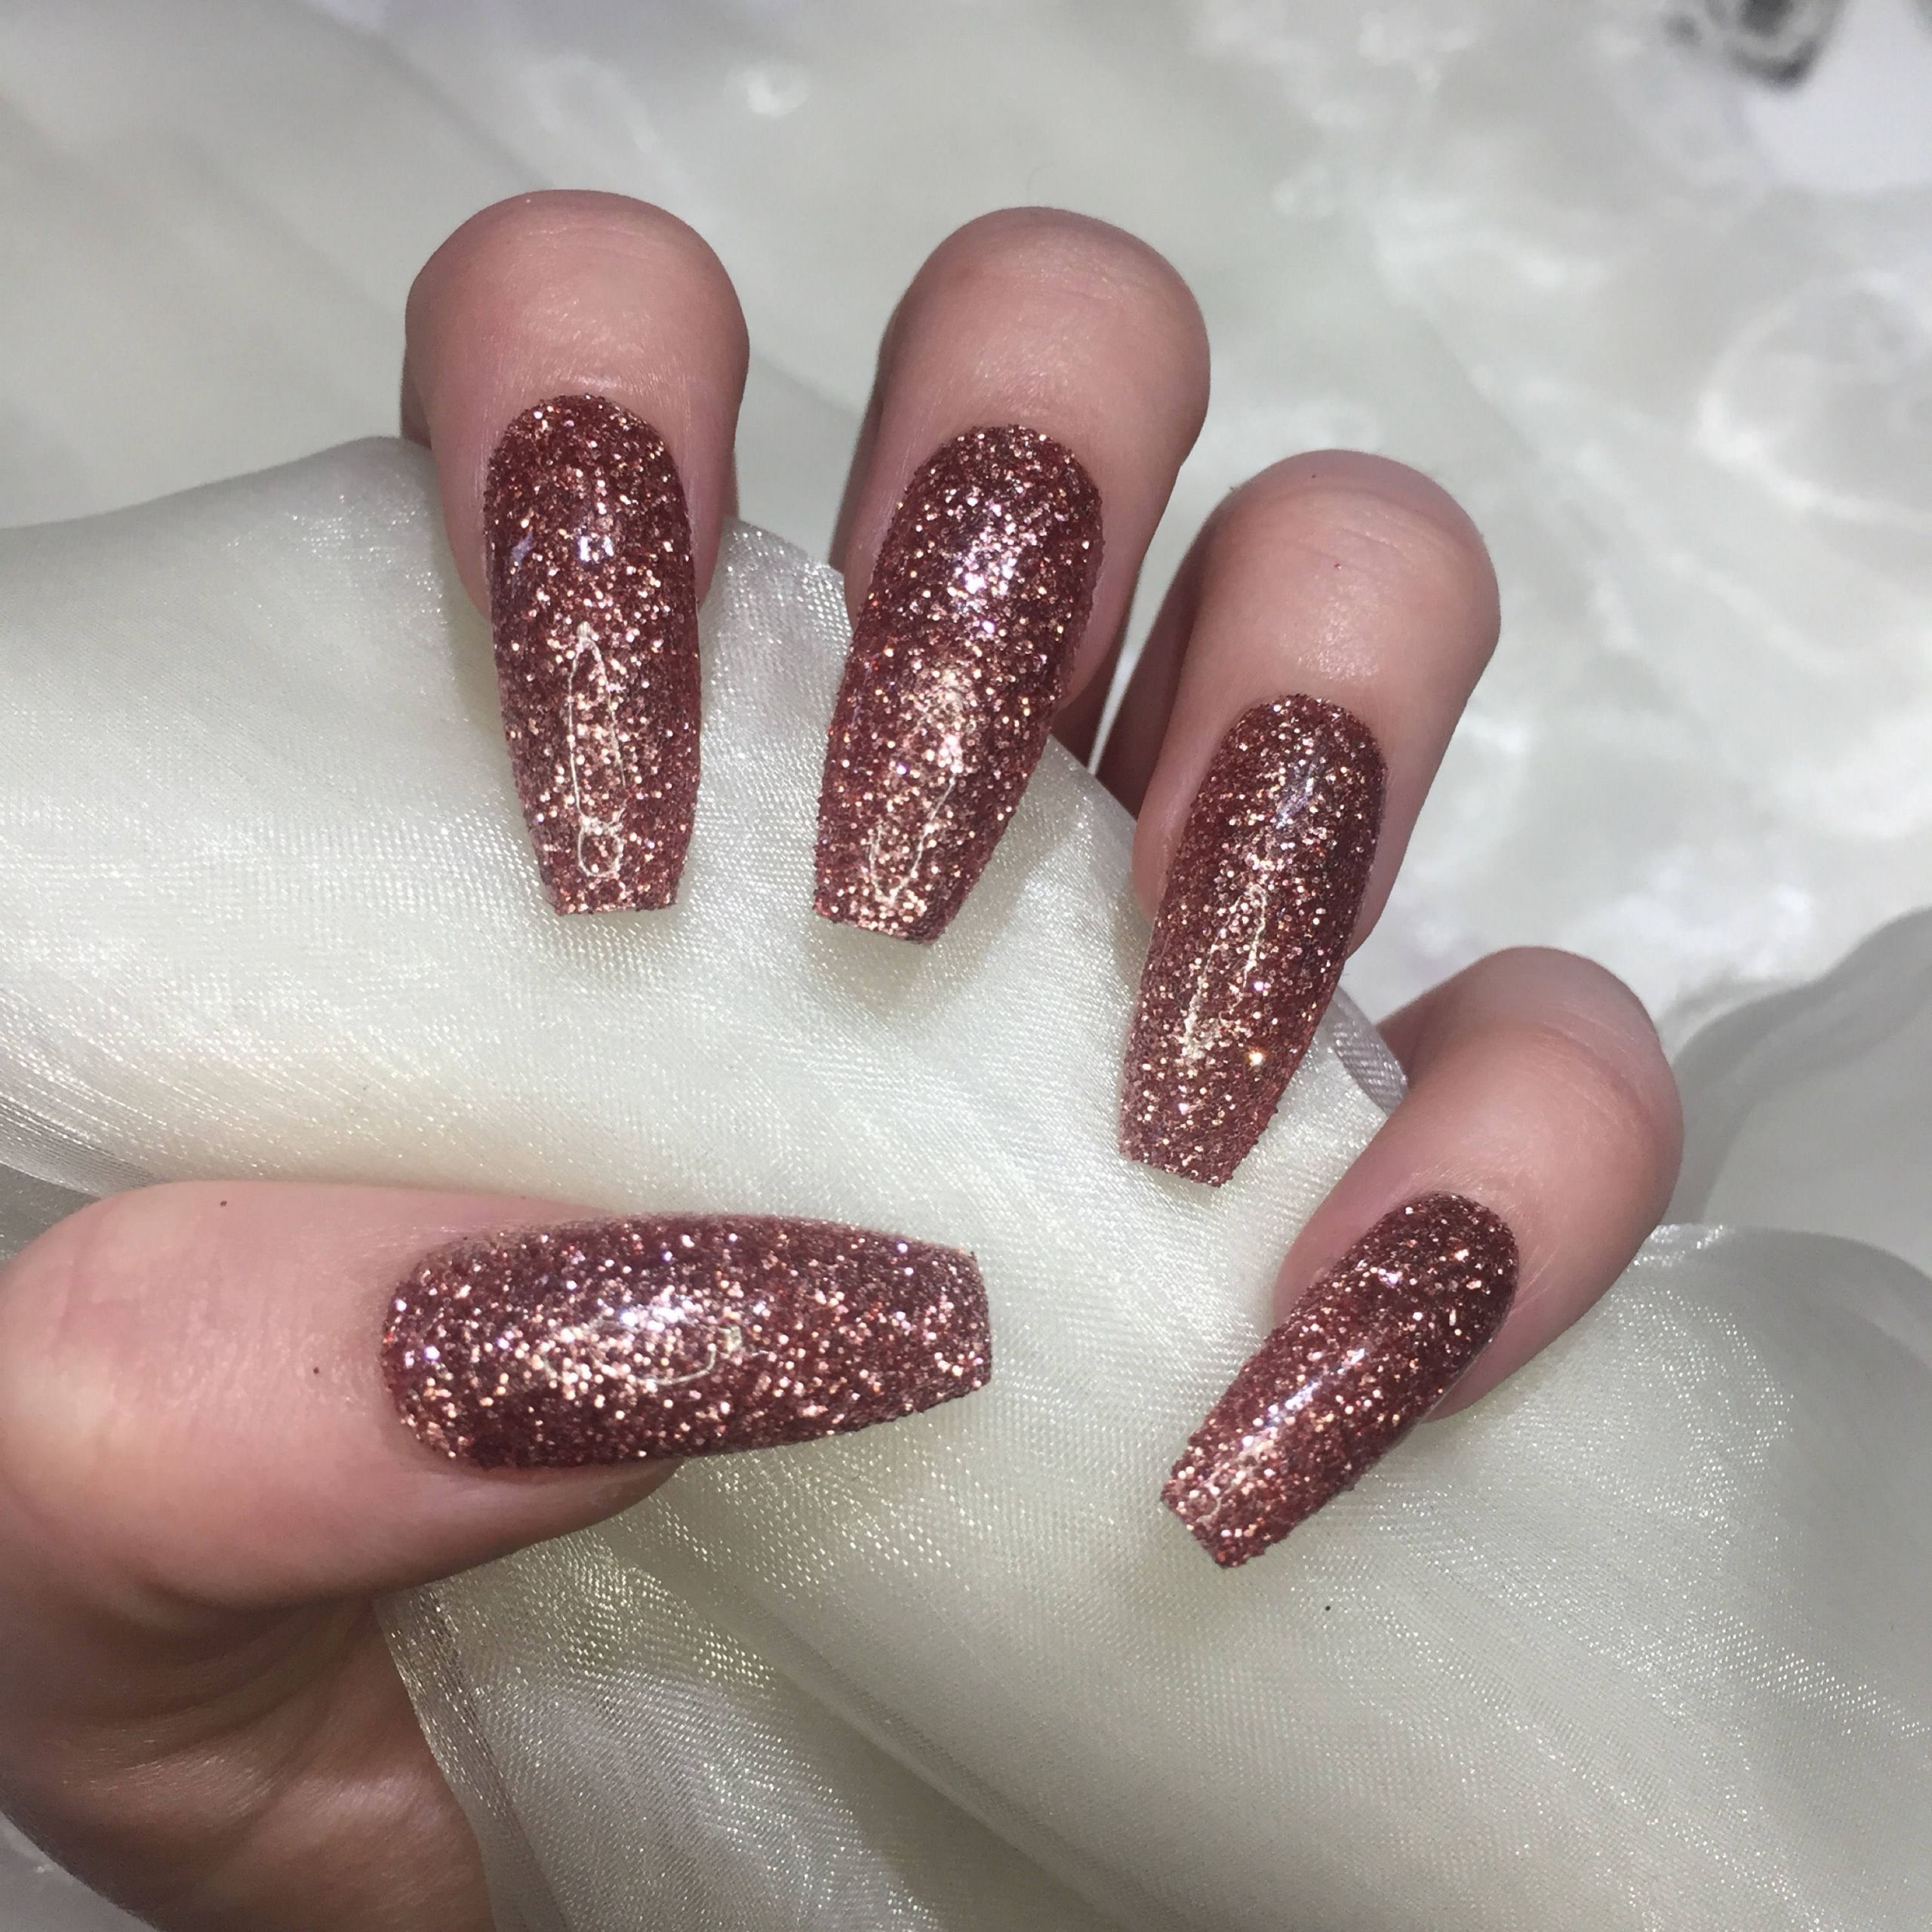 Glitter Nails Coffin
 Extra Long Coffin Rose Gold Glitter Coffin False Nails